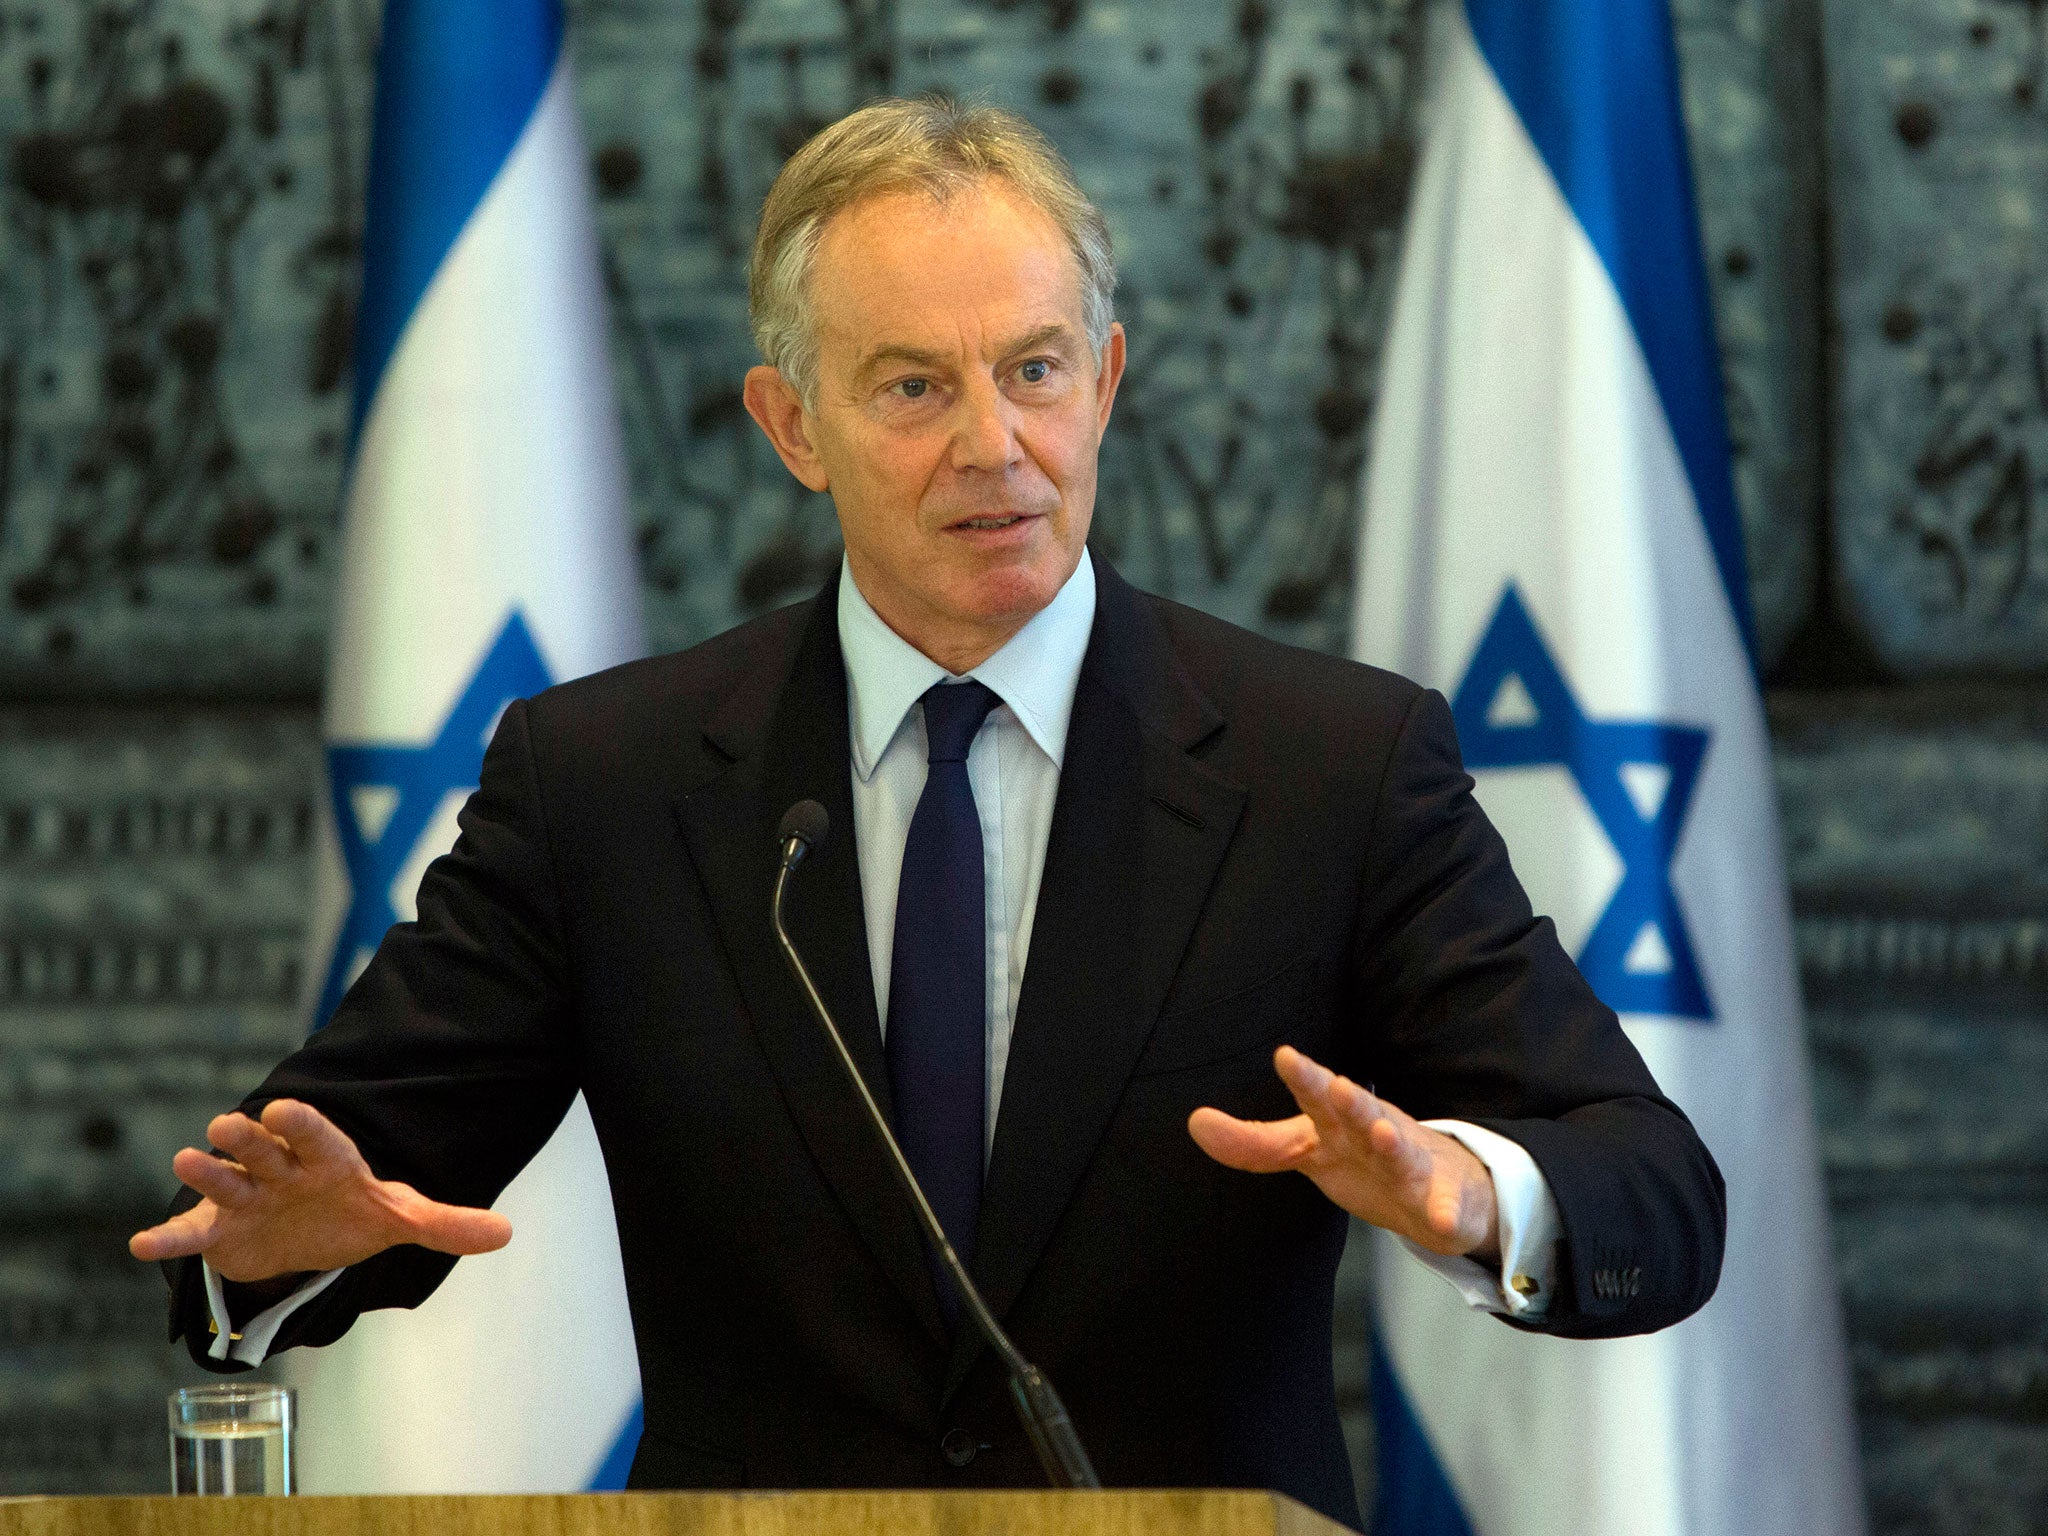 Tony Blair’s time as Middle East envoy representing the US, Russia, the UN and the EU has come to an end